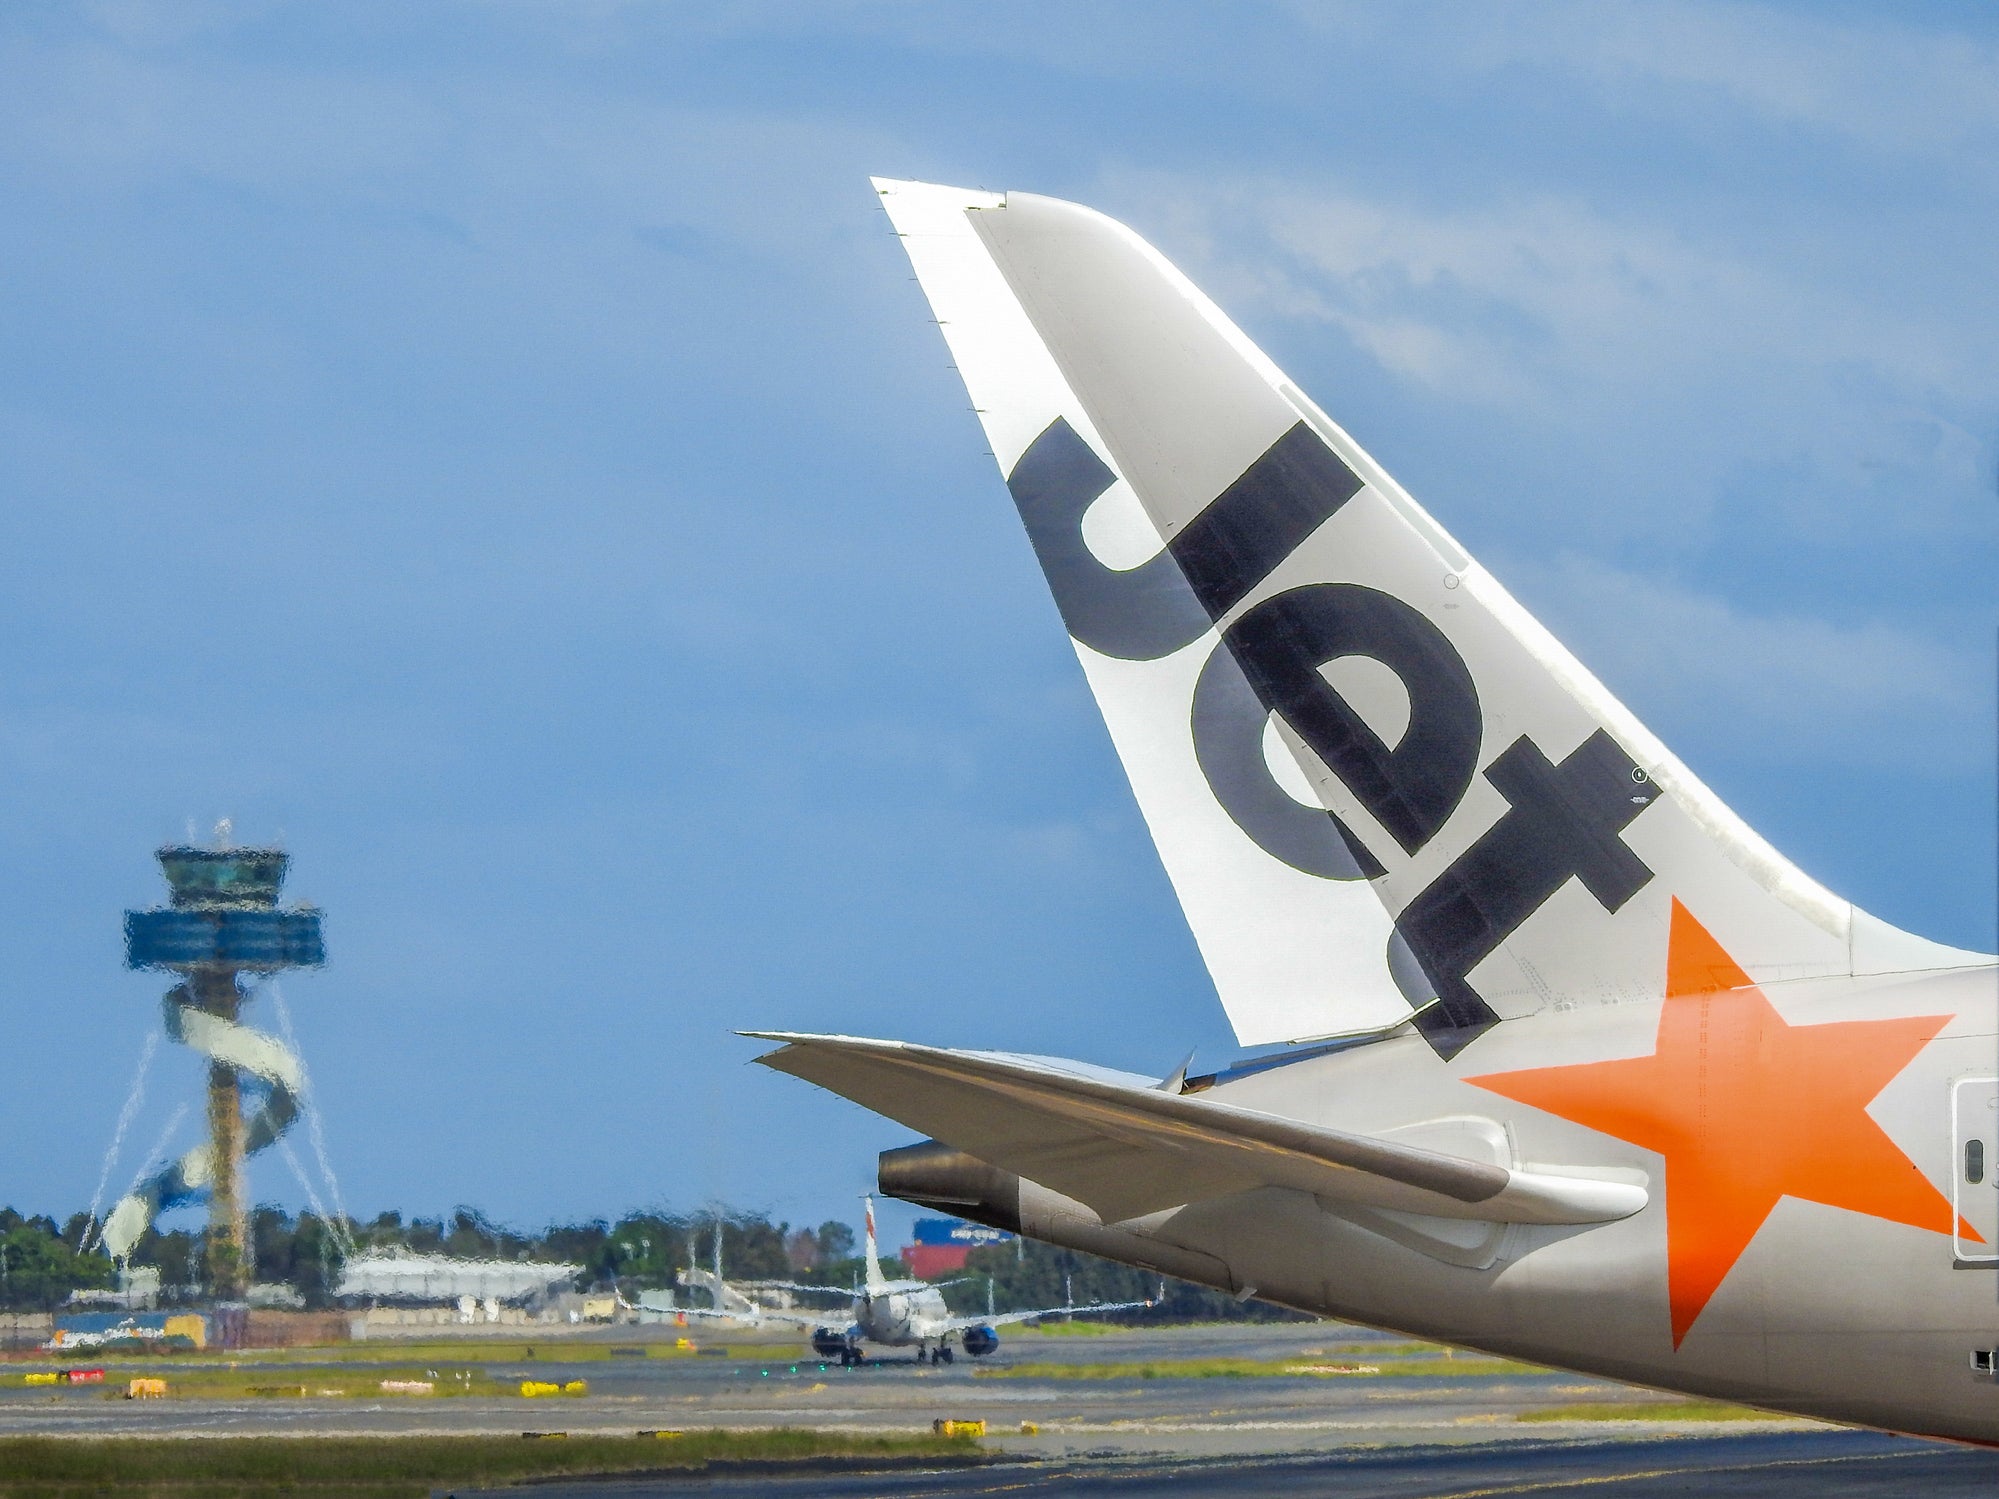 Jetstar flight JQ501 was due to depart from Sydney at 6am on Tuesday